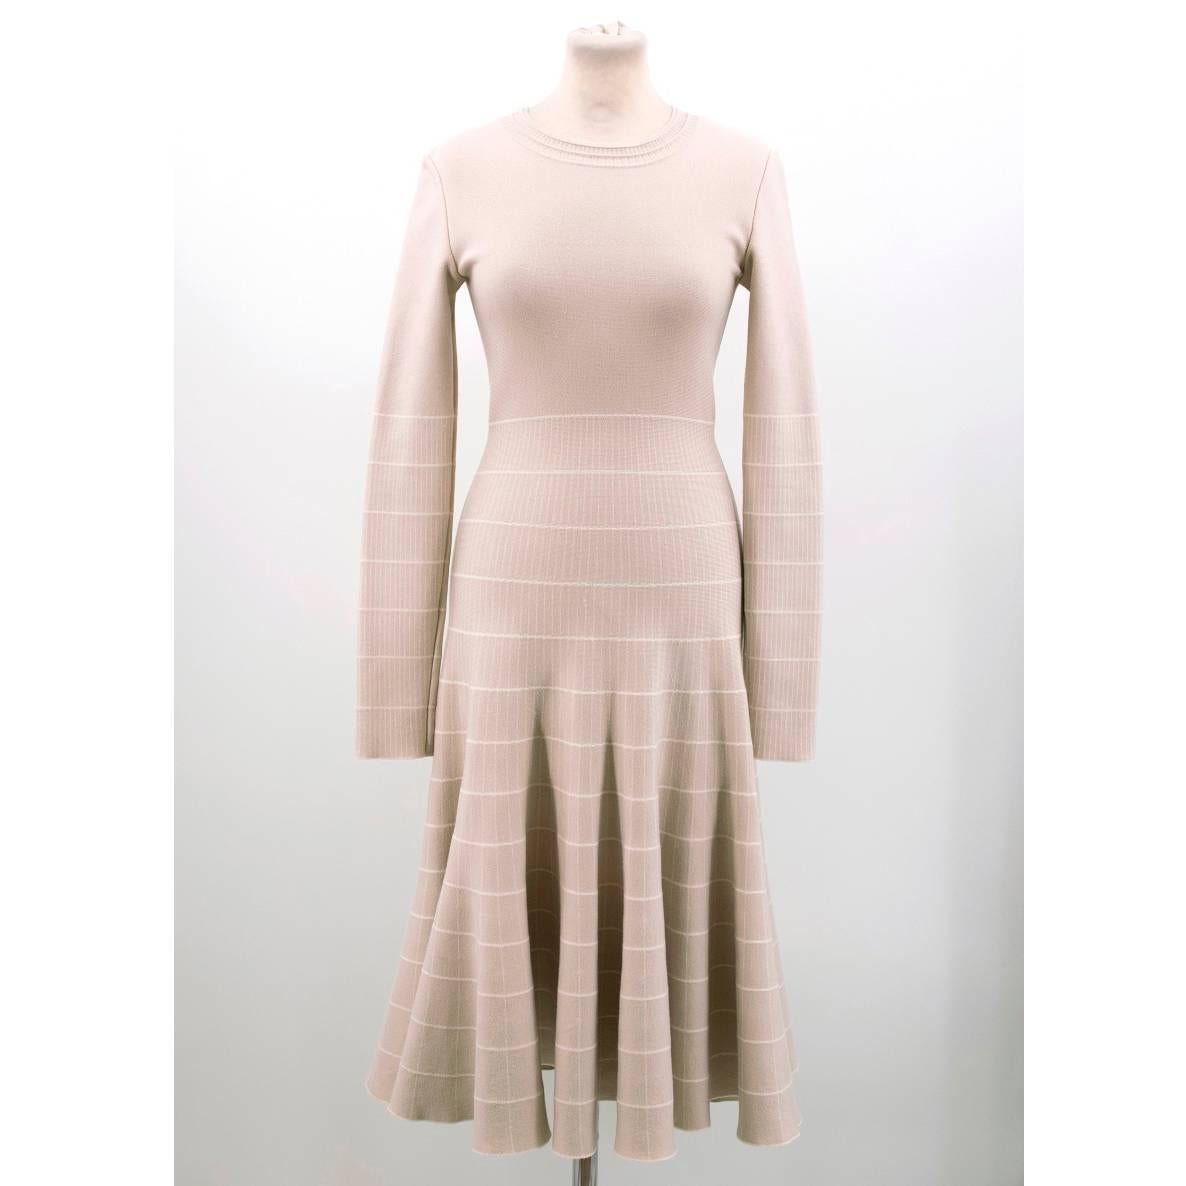 Alaia Nude Knit Midi Dress In Excellent Condition For Sale In London, GB